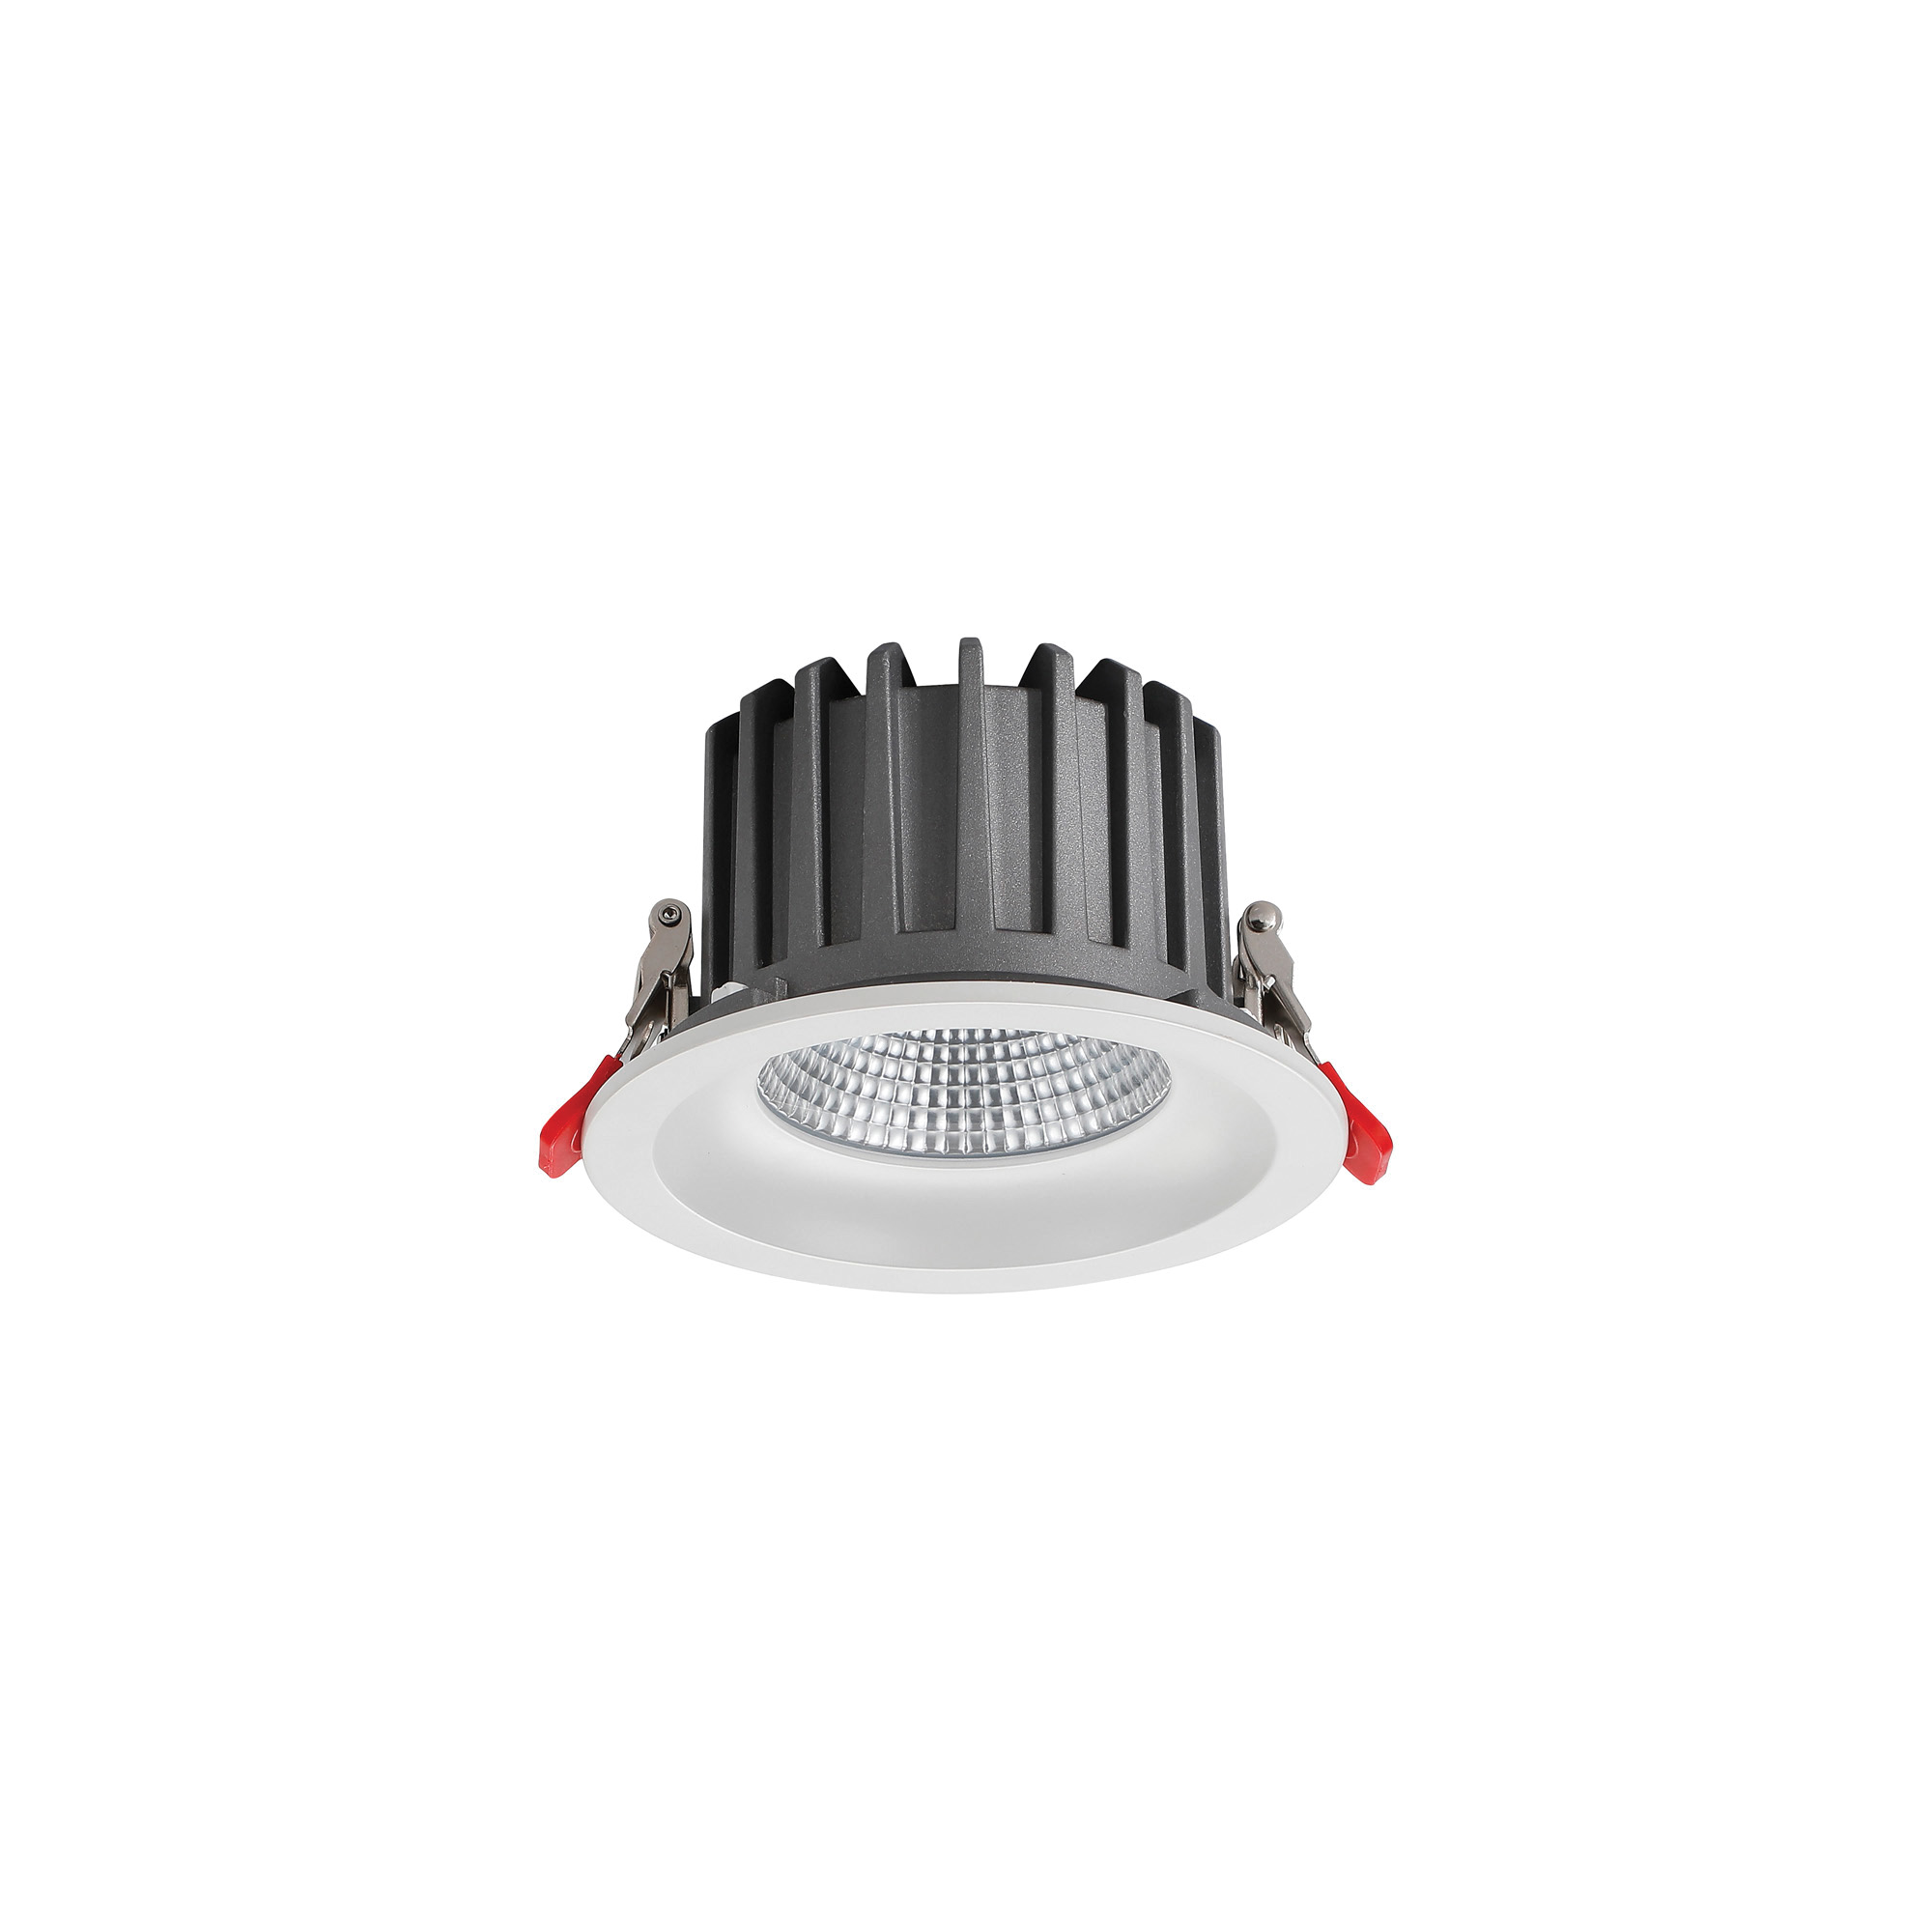 DL200056  Bionic 15; 15W; 350mA; White Deep Round Recessed Downlight; 1178lm ;Cut Out 120mm; 40° ; 4000K; IP44; DRIVER INC.; 5yrs Warranty.